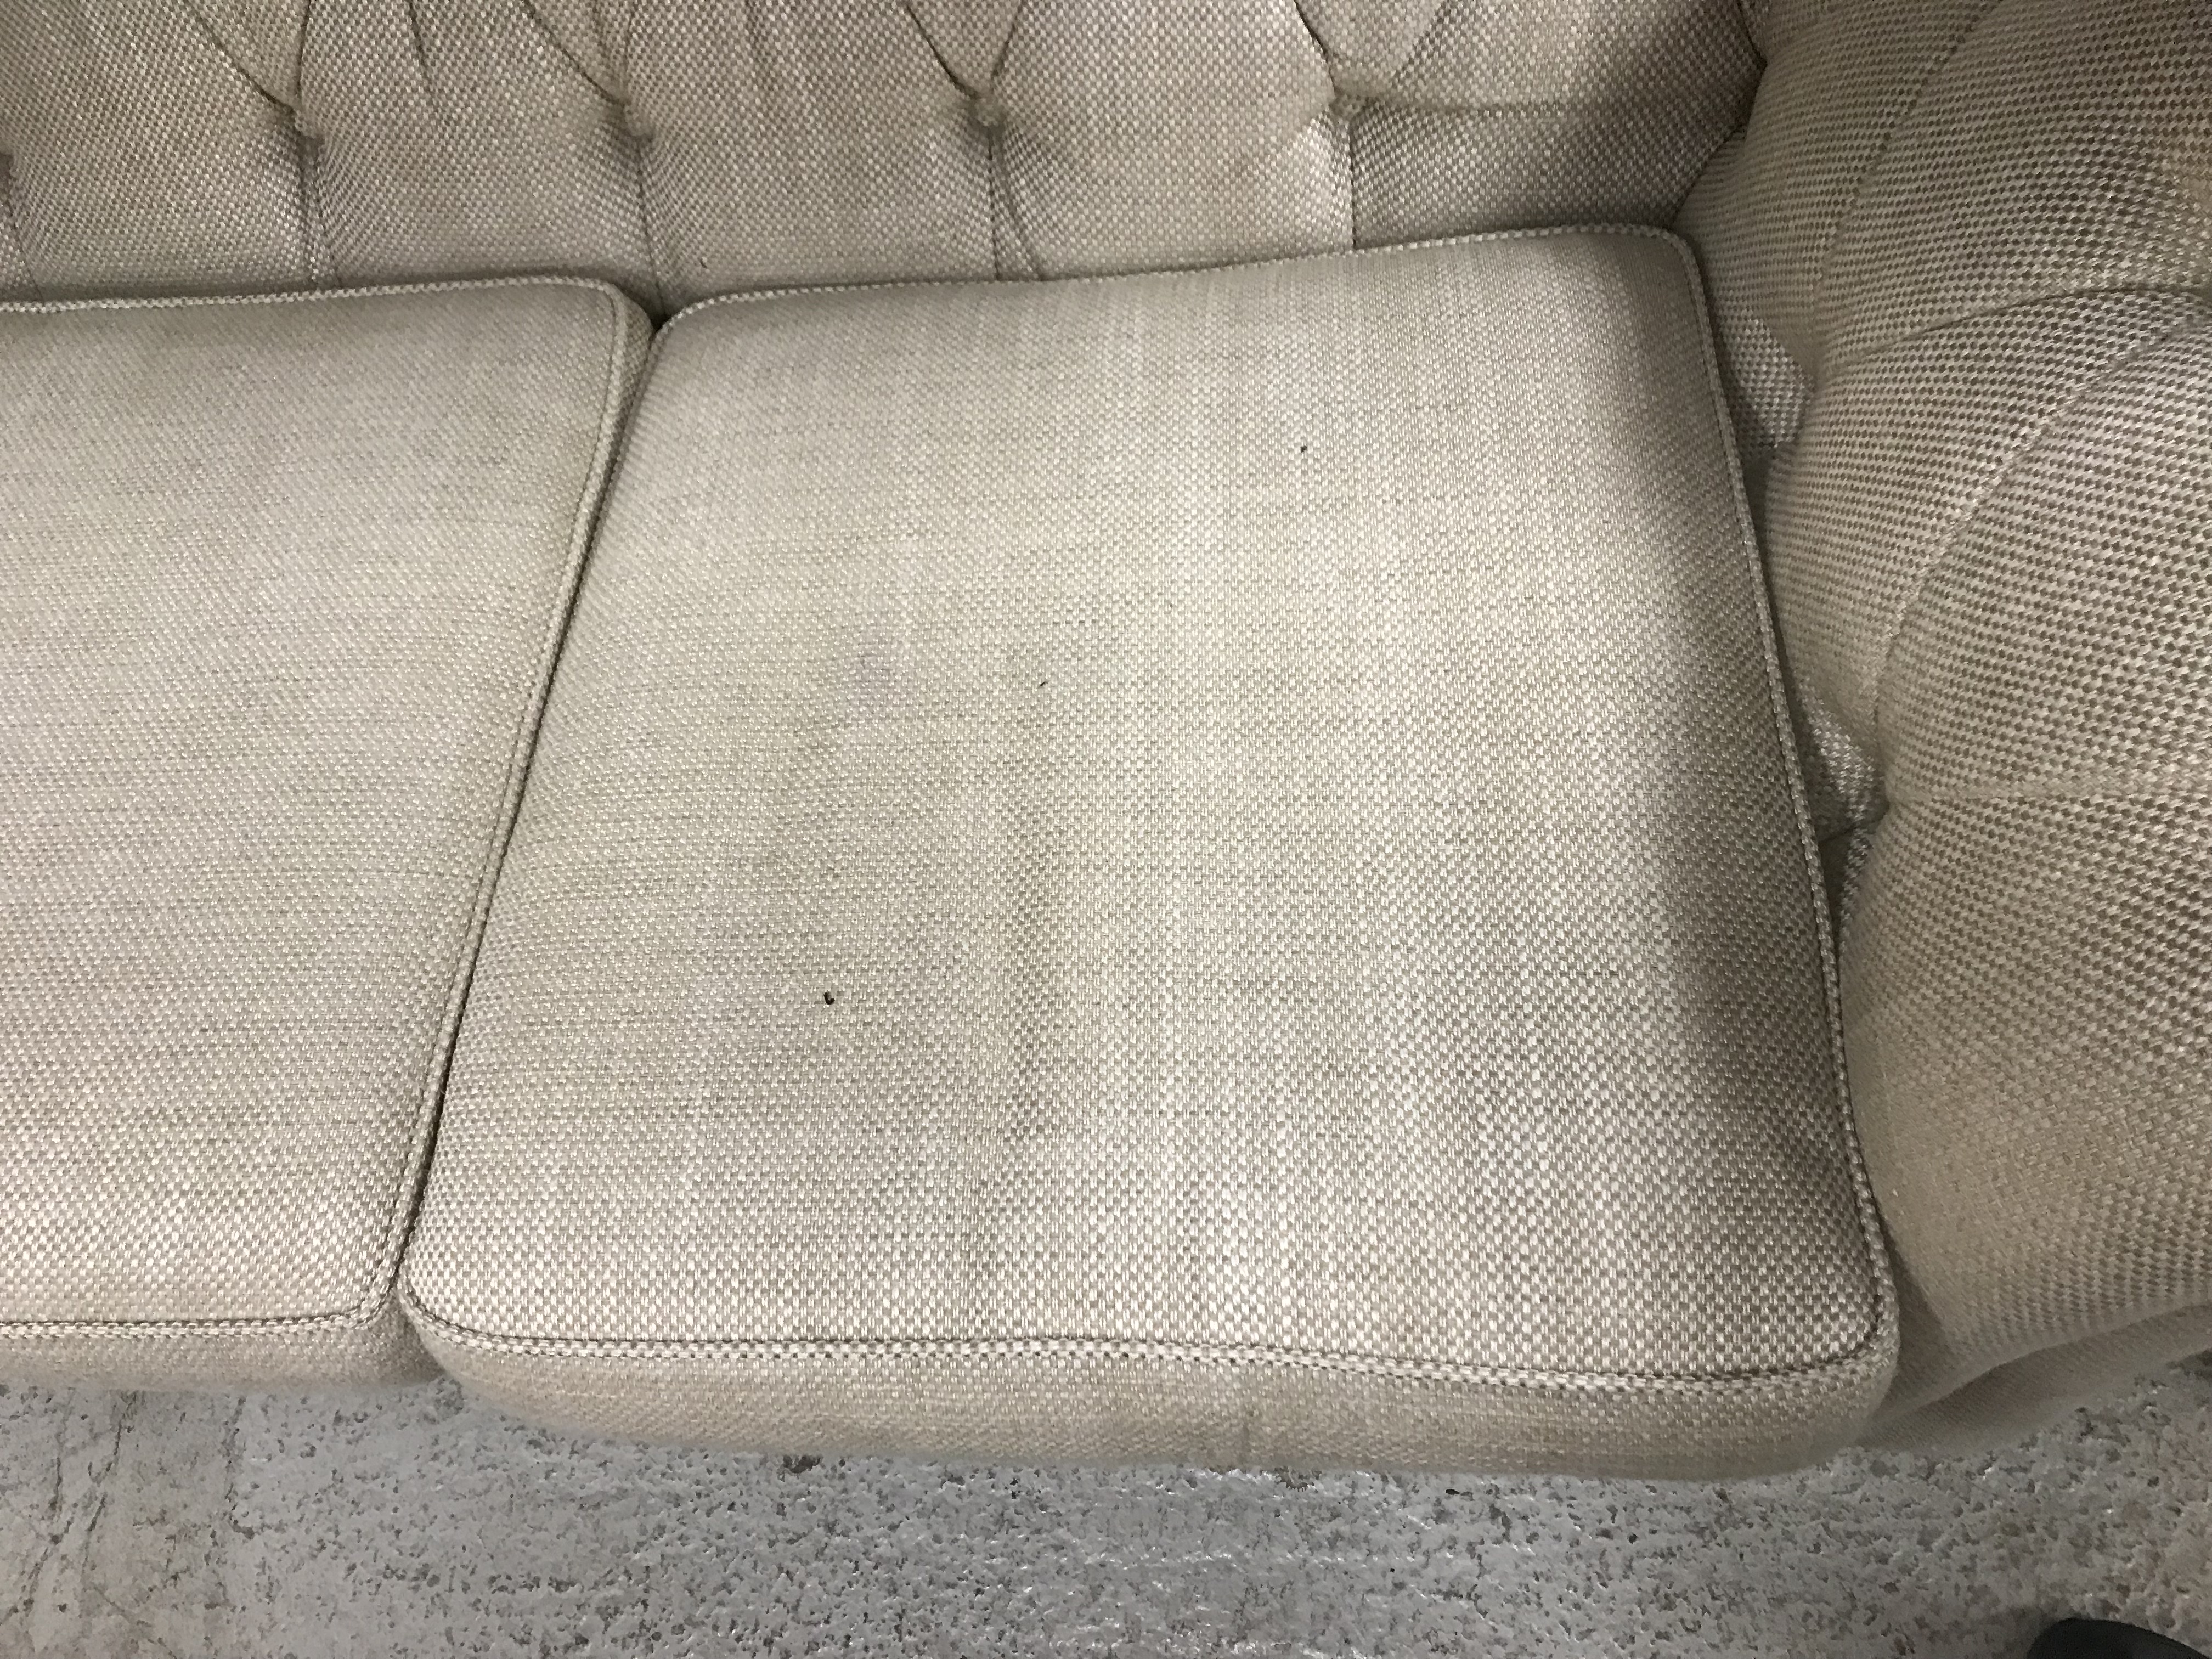 A Laura Ashley "Hudson" two seat sofa "Dalton Natural" buttoned upholstered, - Image 4 of 11